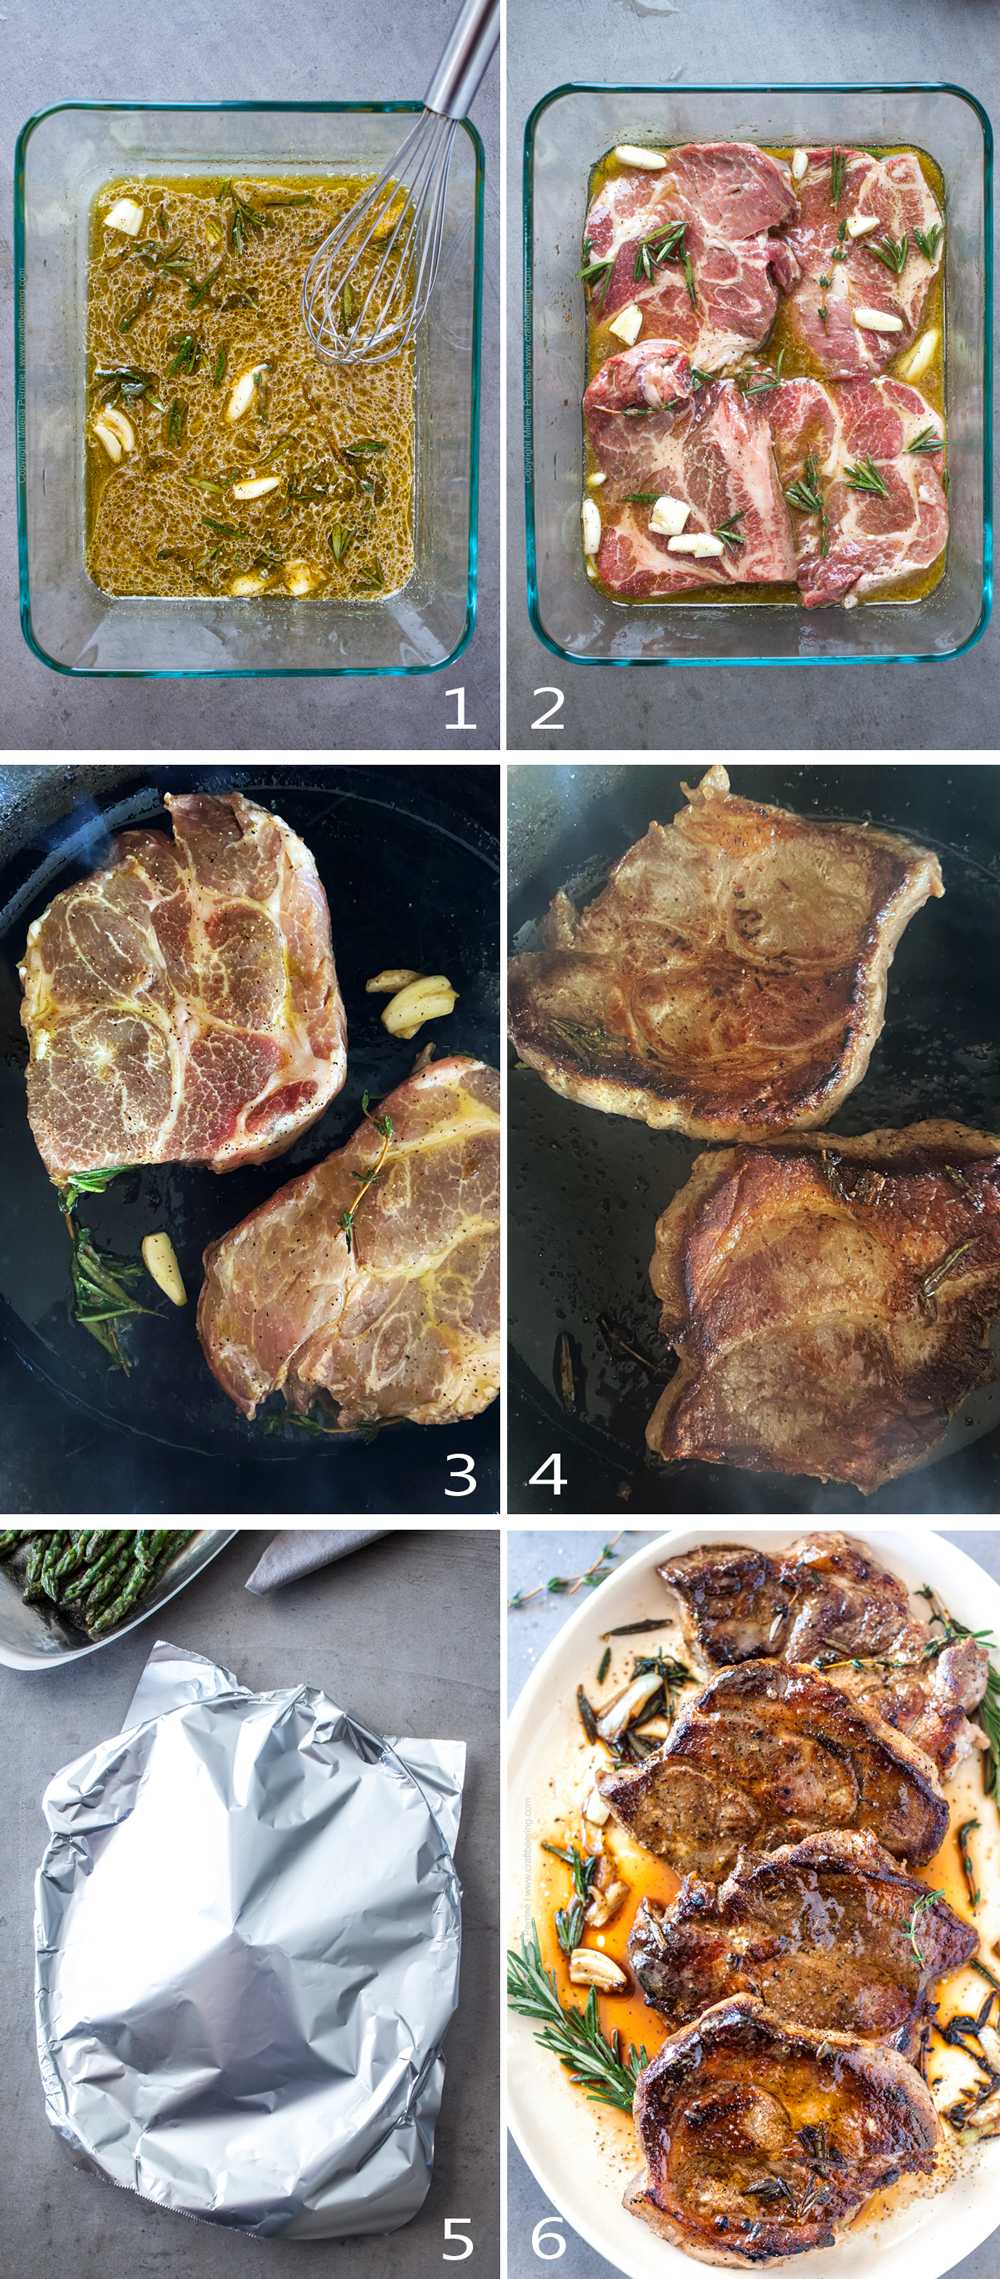 How to marinate and cook pork neck chops.